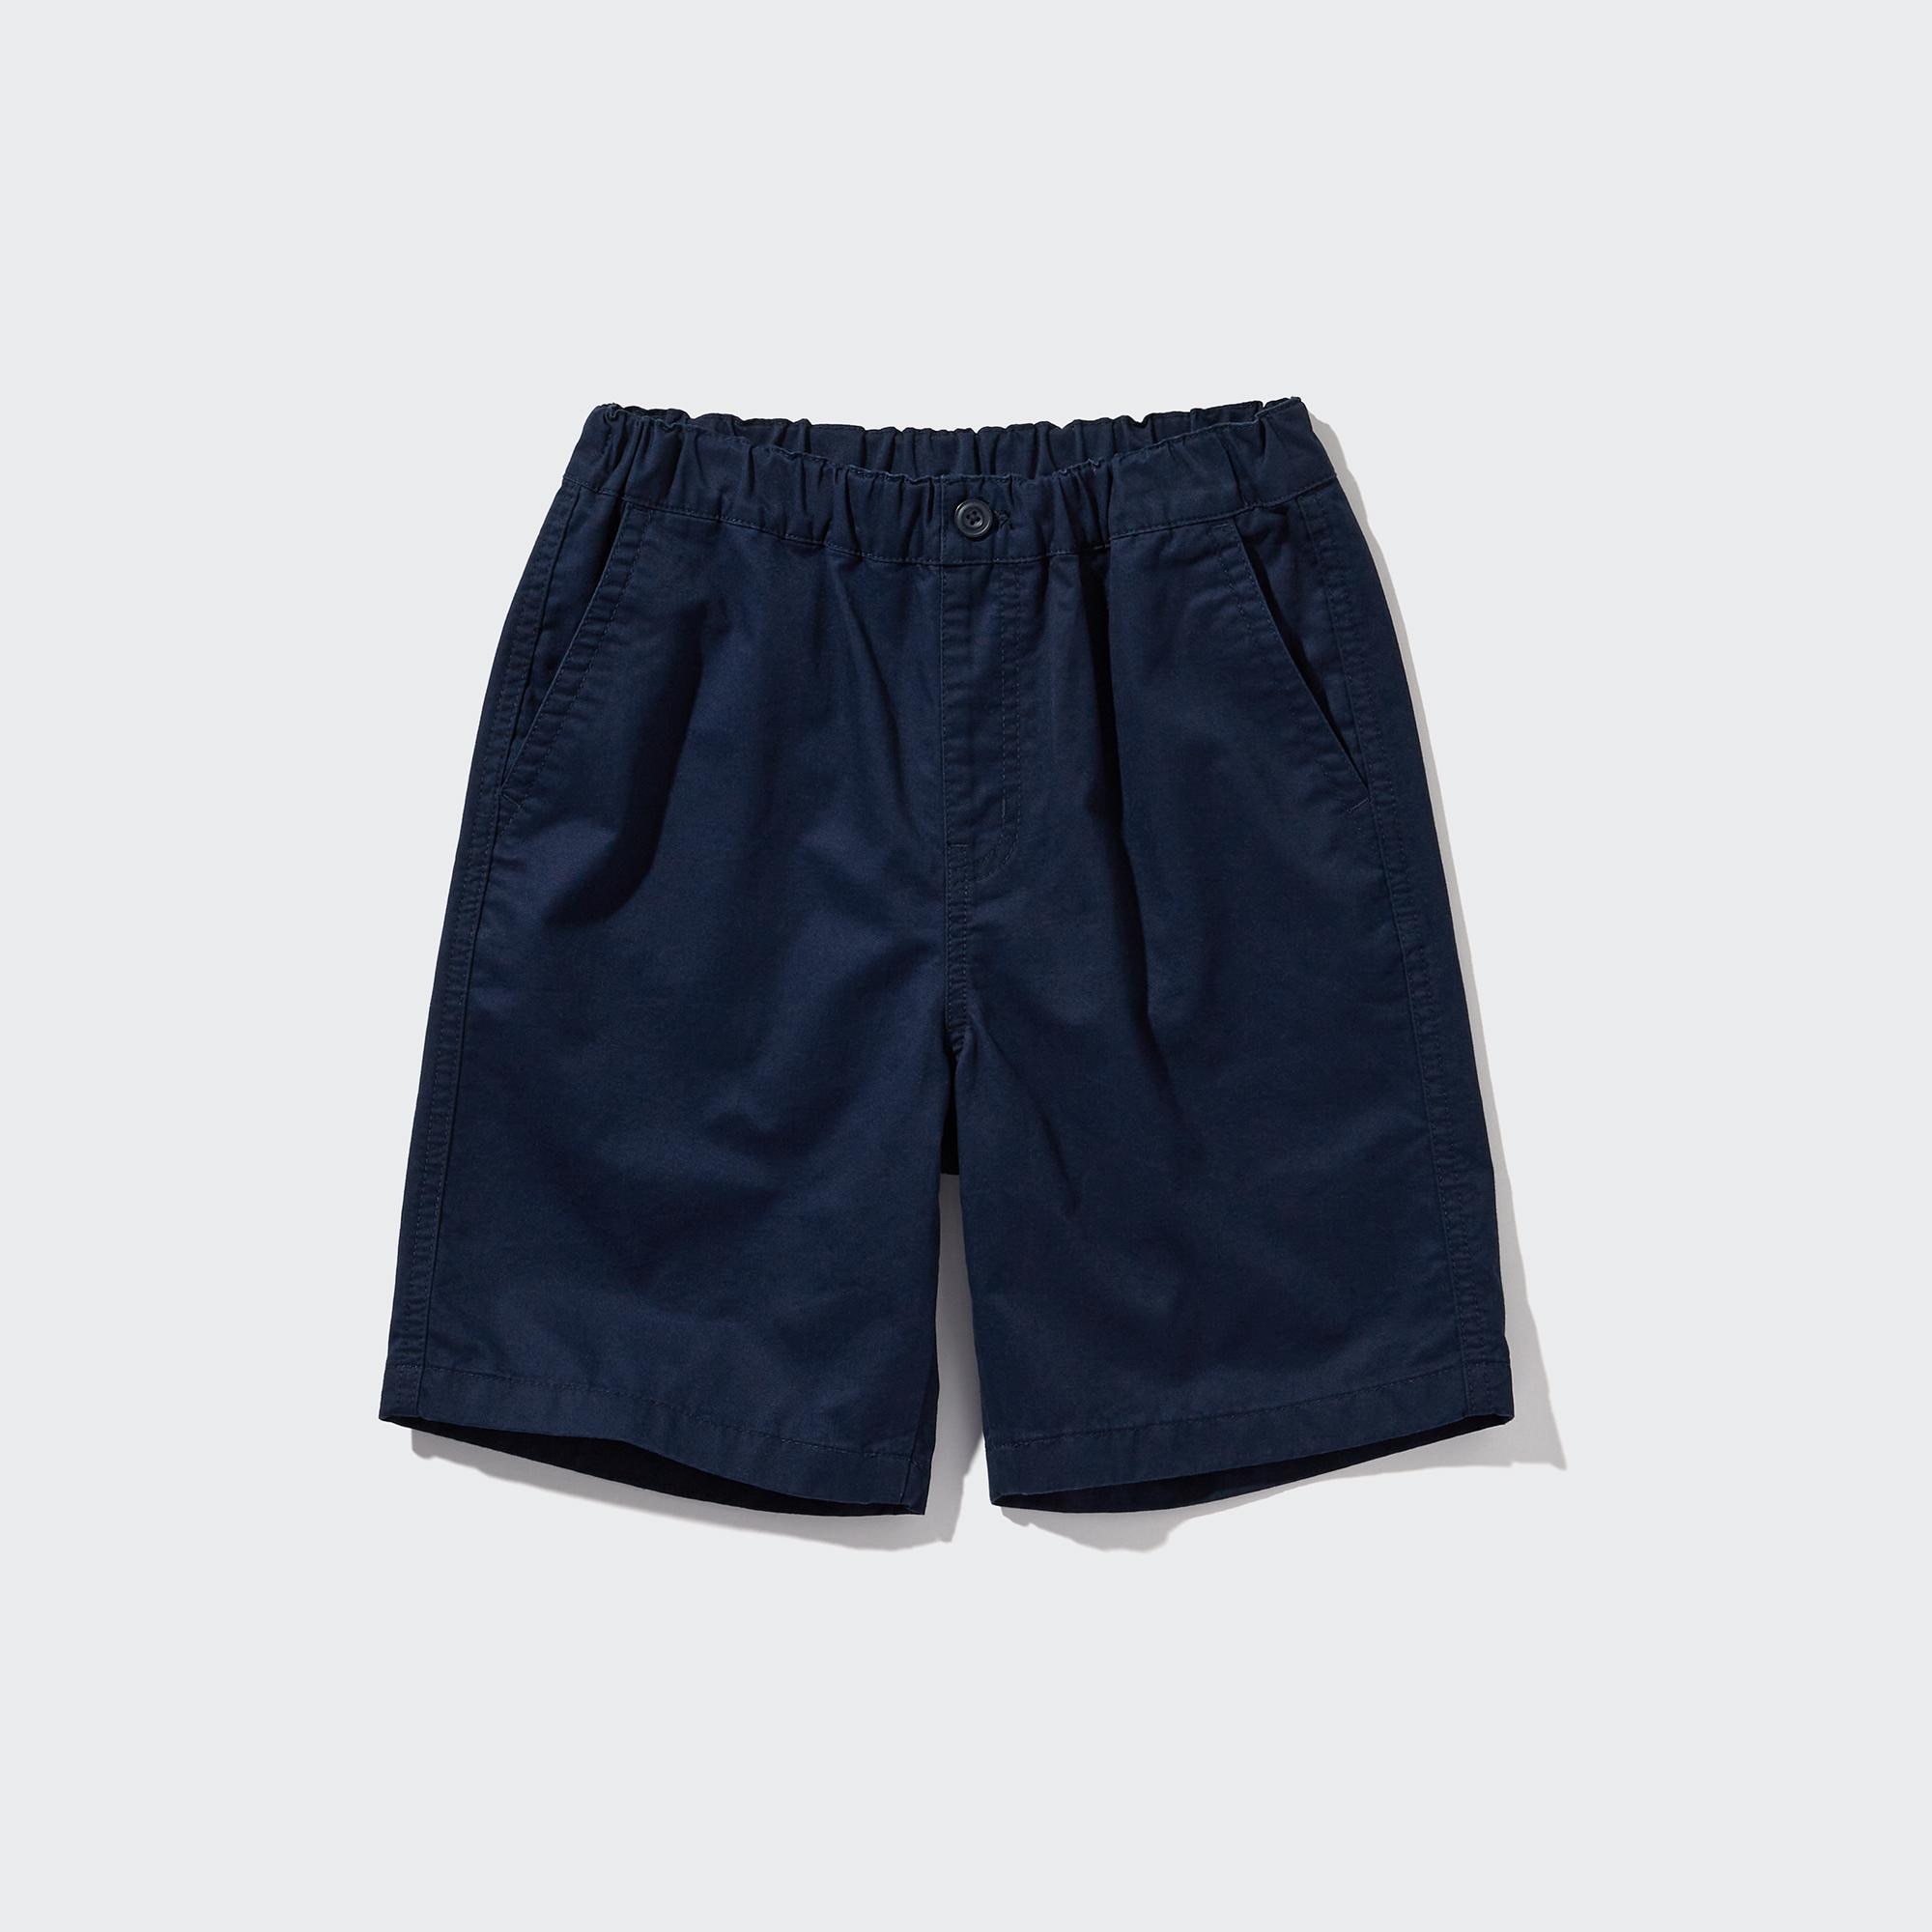 How to Style Everlane Easy Shorts for Spring and Summer